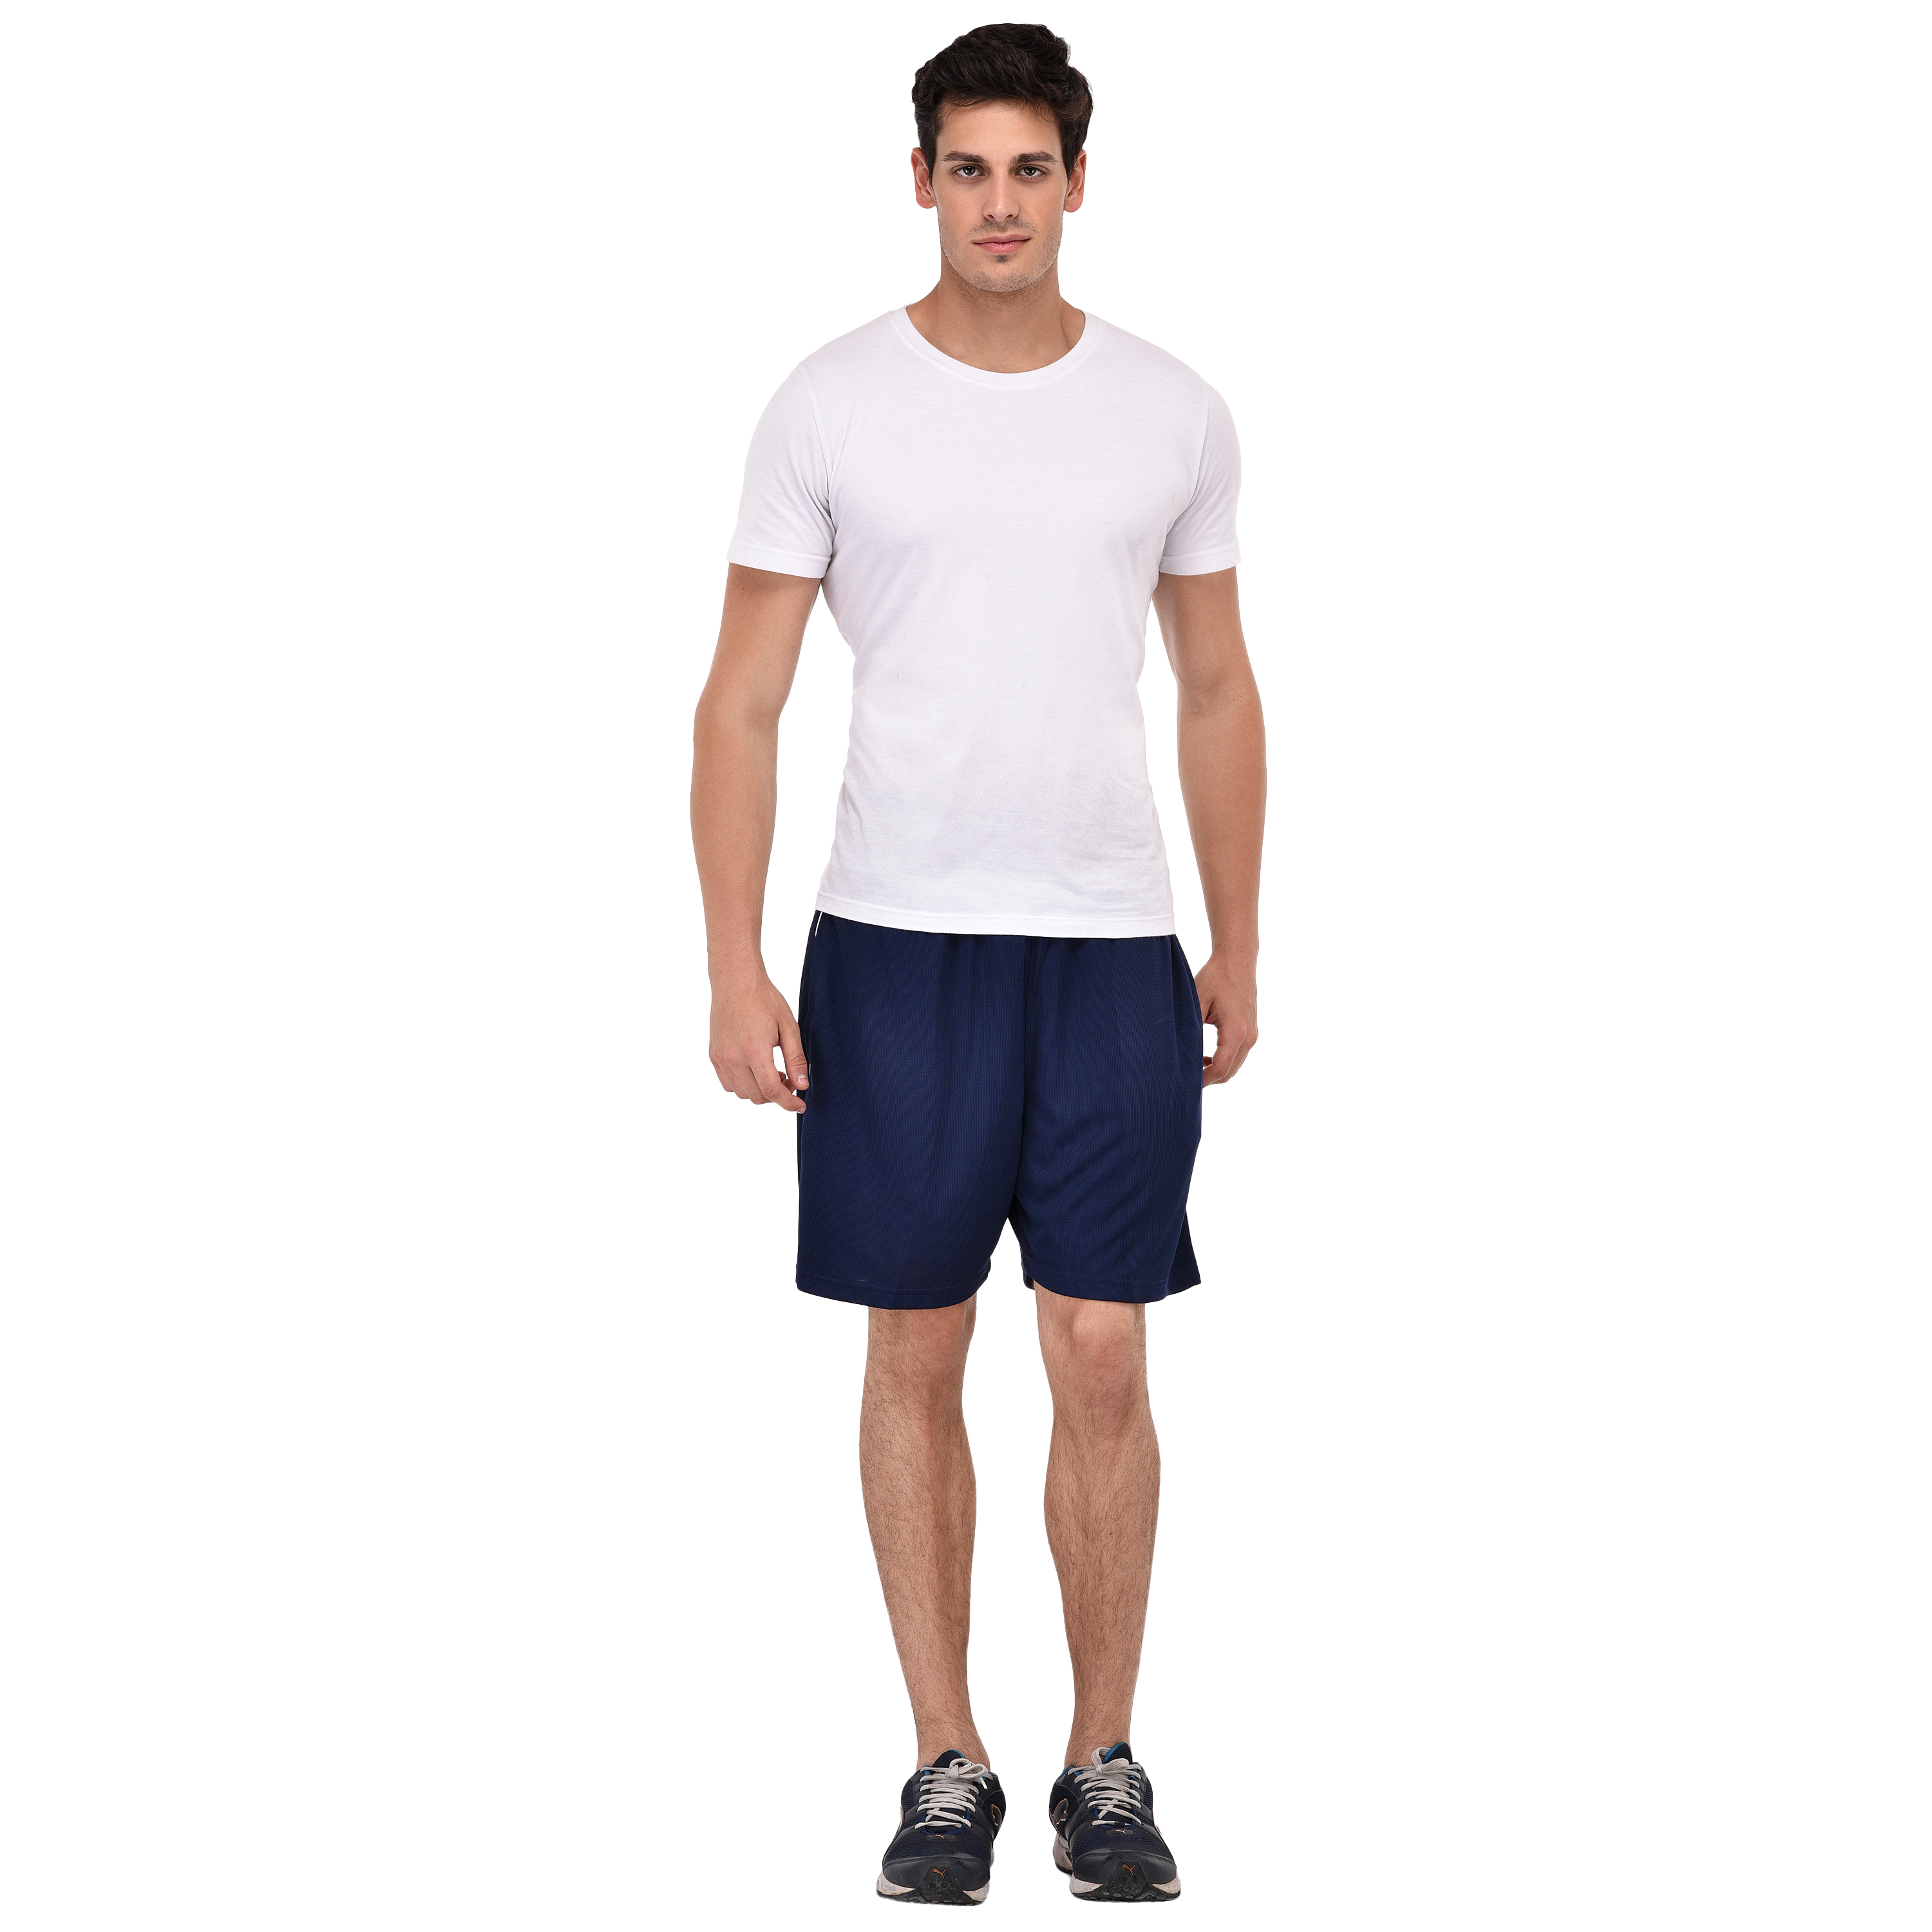 Buy Navy Blue Shorts for Men's by Fashion 7 Online - Get 58% Off